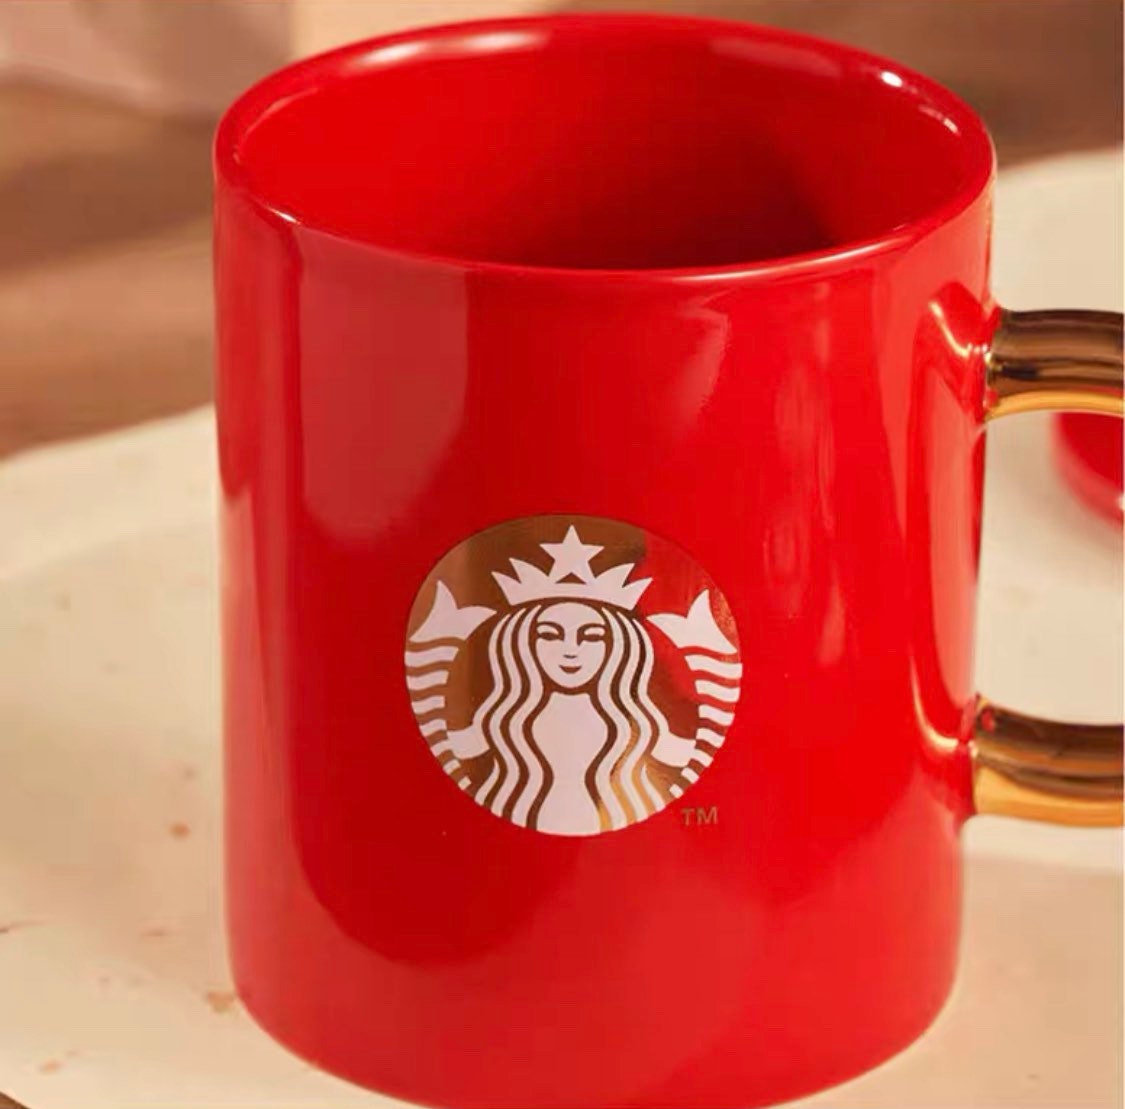 Starbucks China 400ml 2022 new year cute tiger series red ceramics mug with golden tiger cup cover